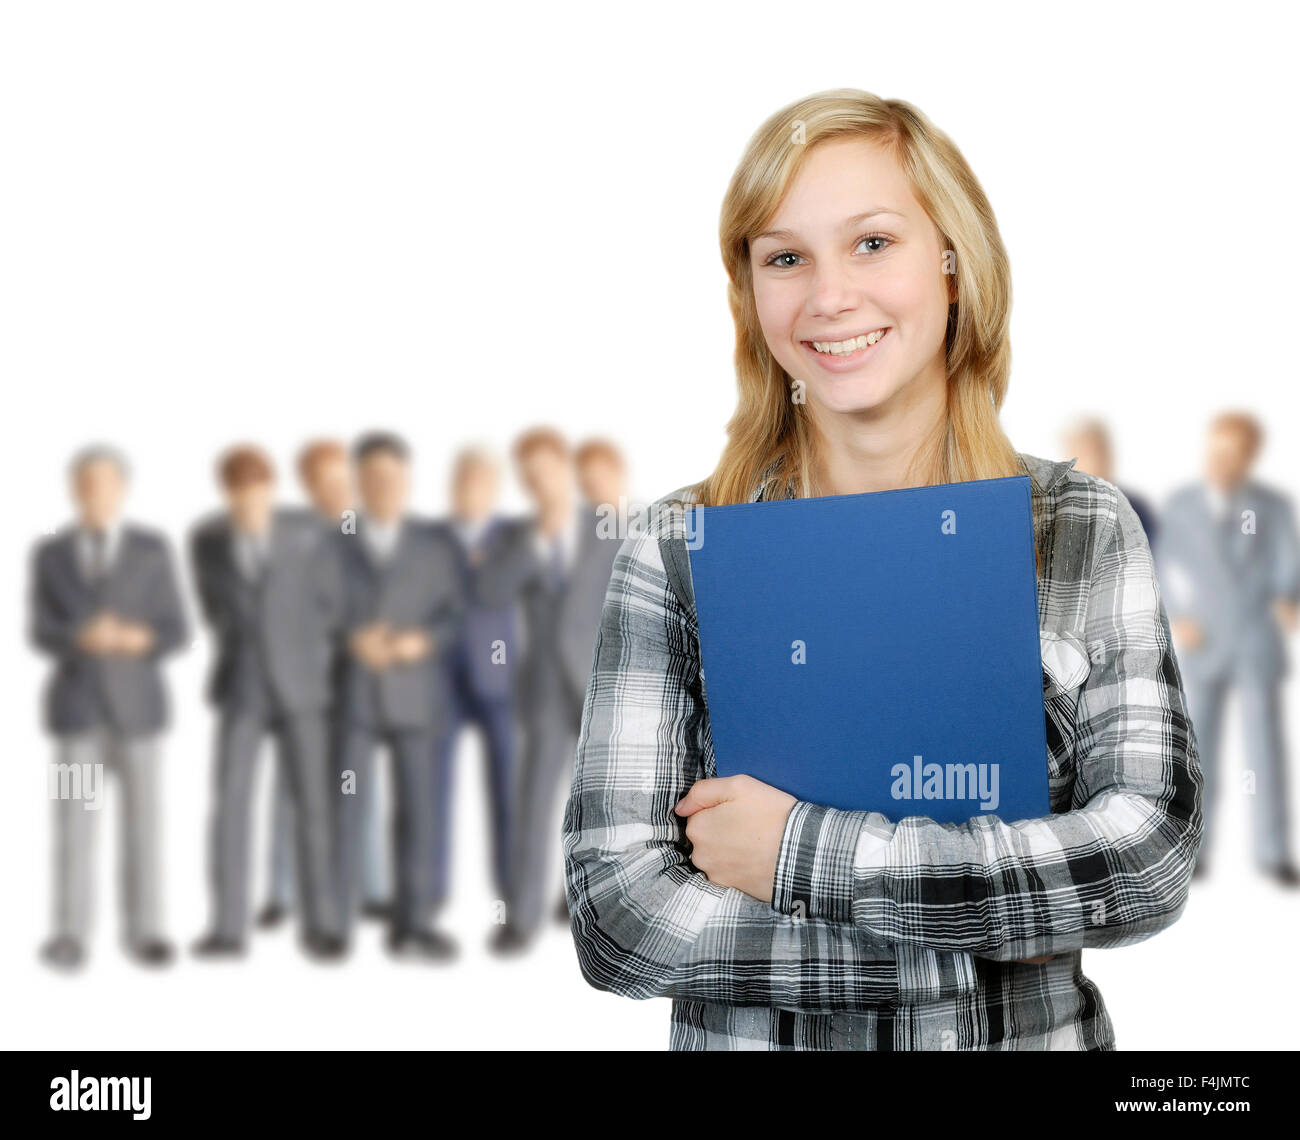 Young woman stands in front of a group of business men. Stock Photo